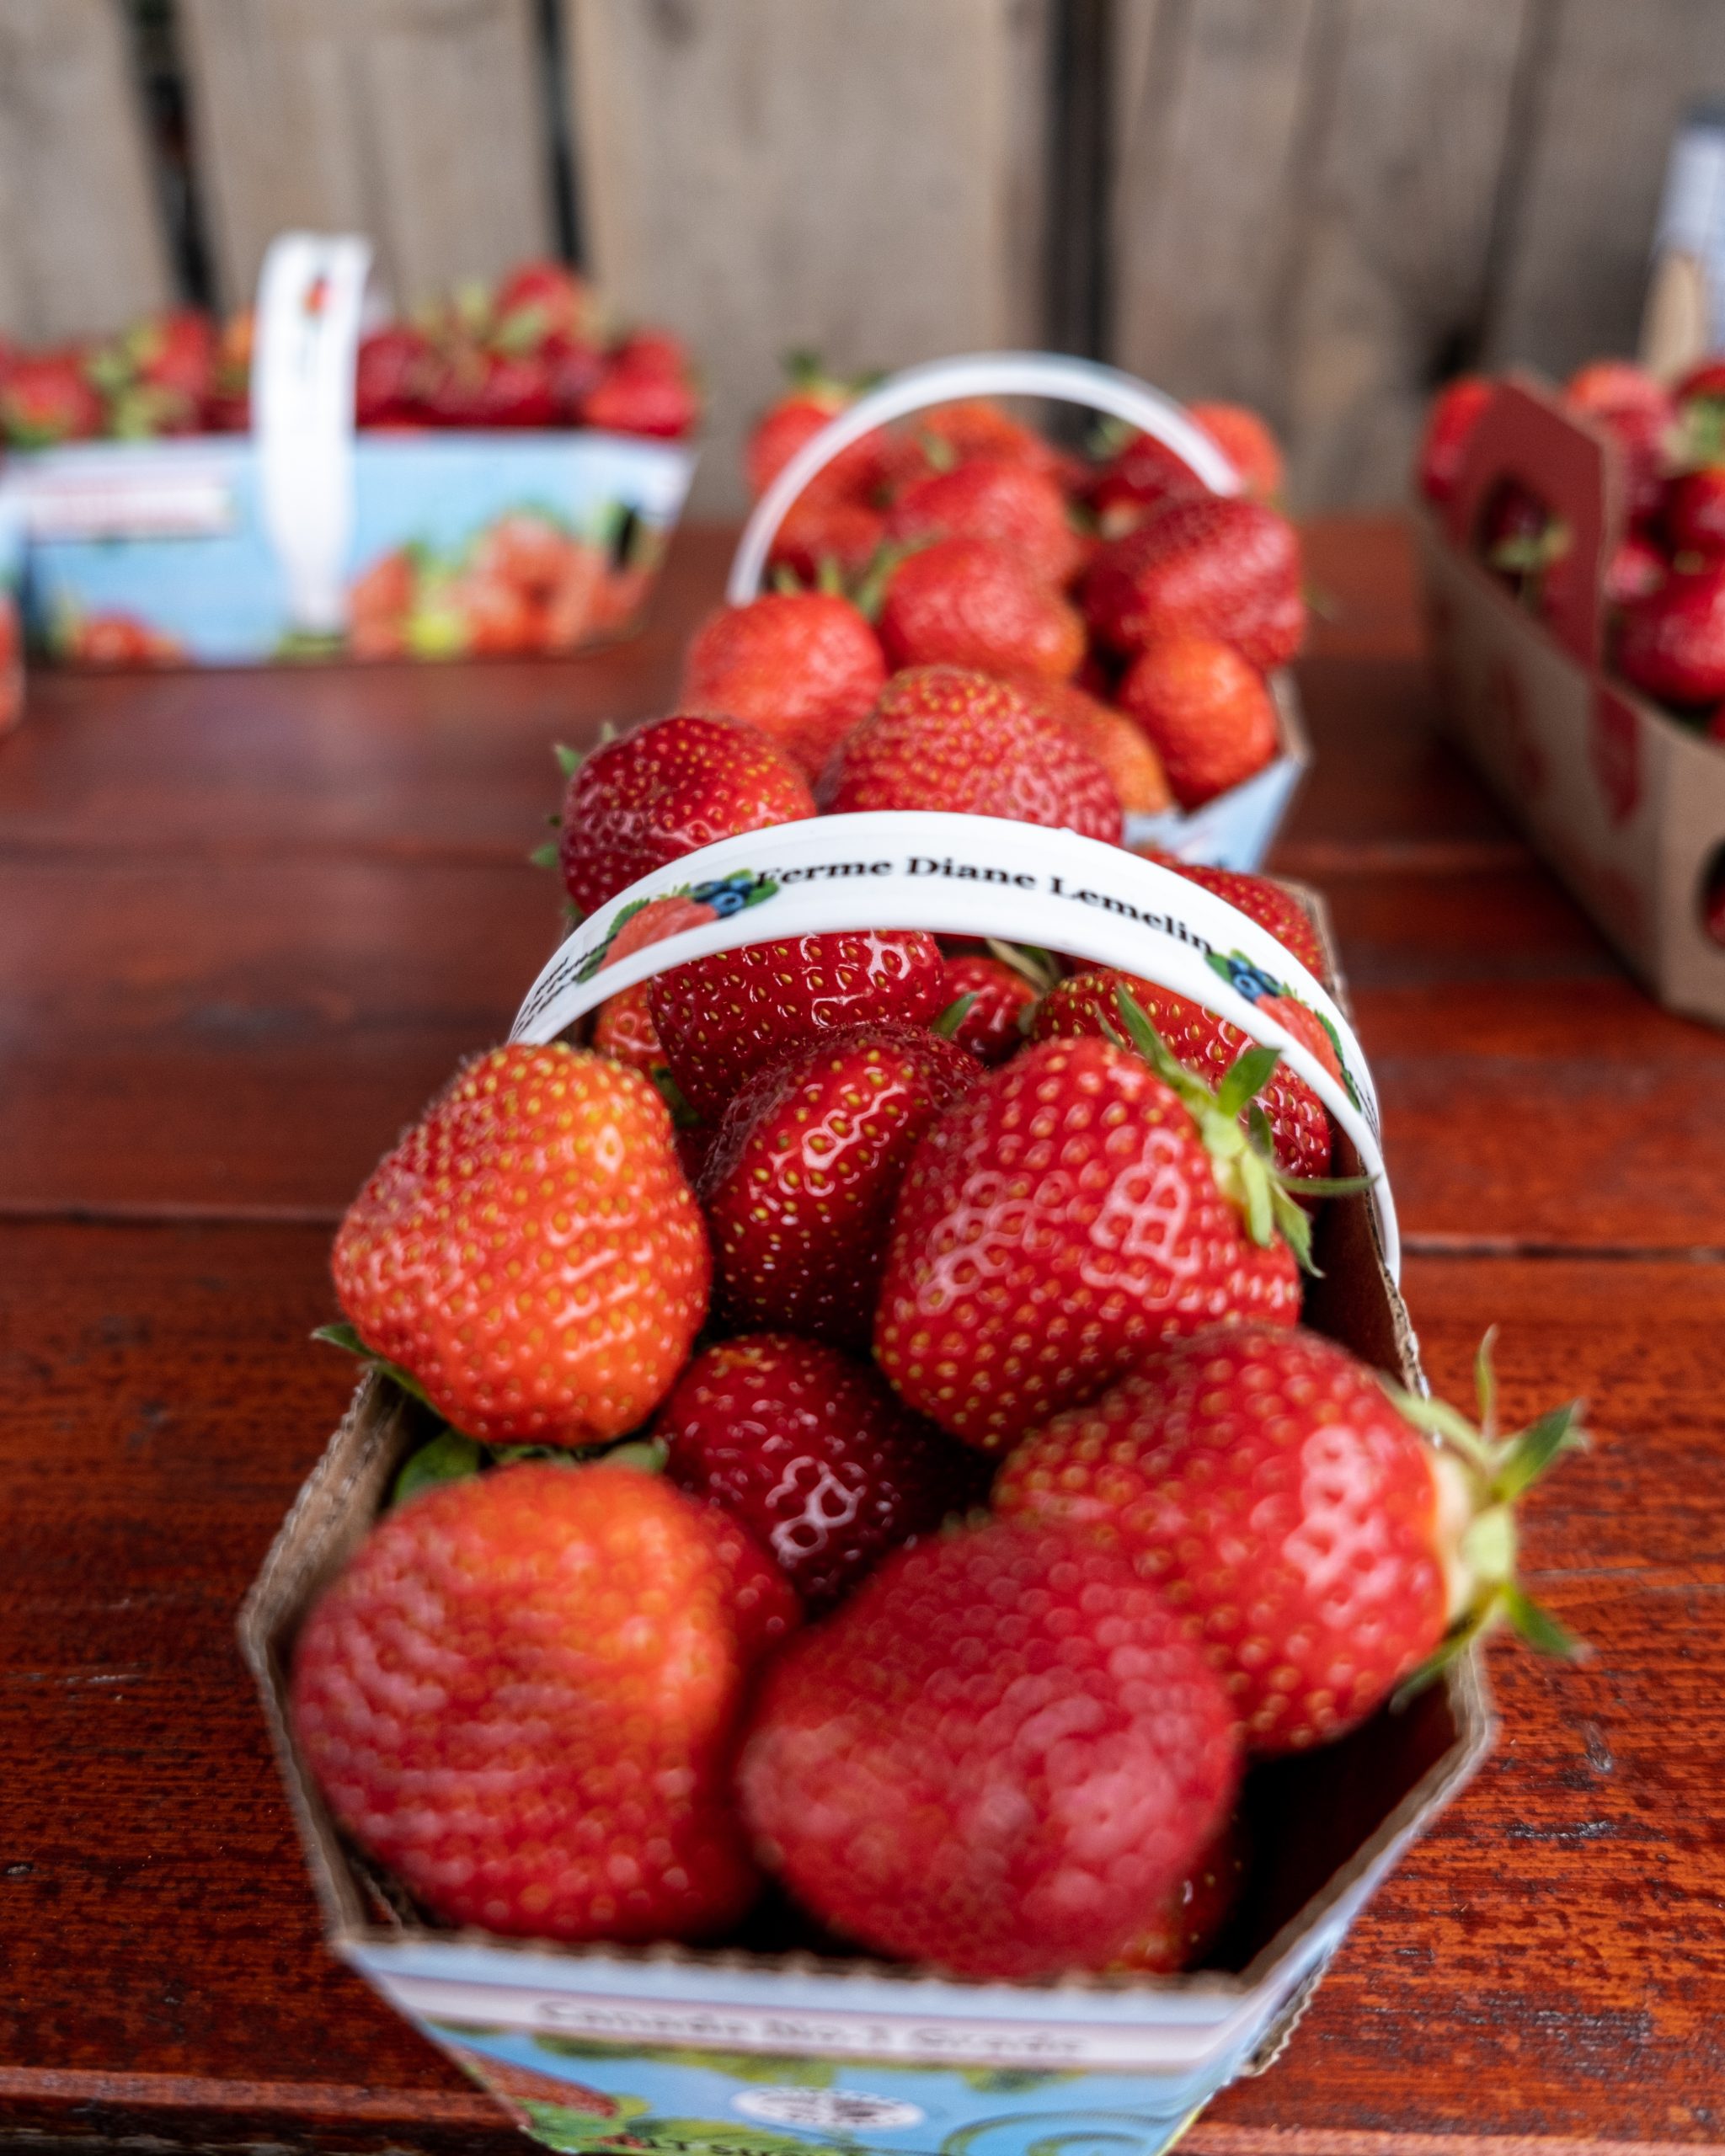 Fresh strawberries from Ile D'Orleans